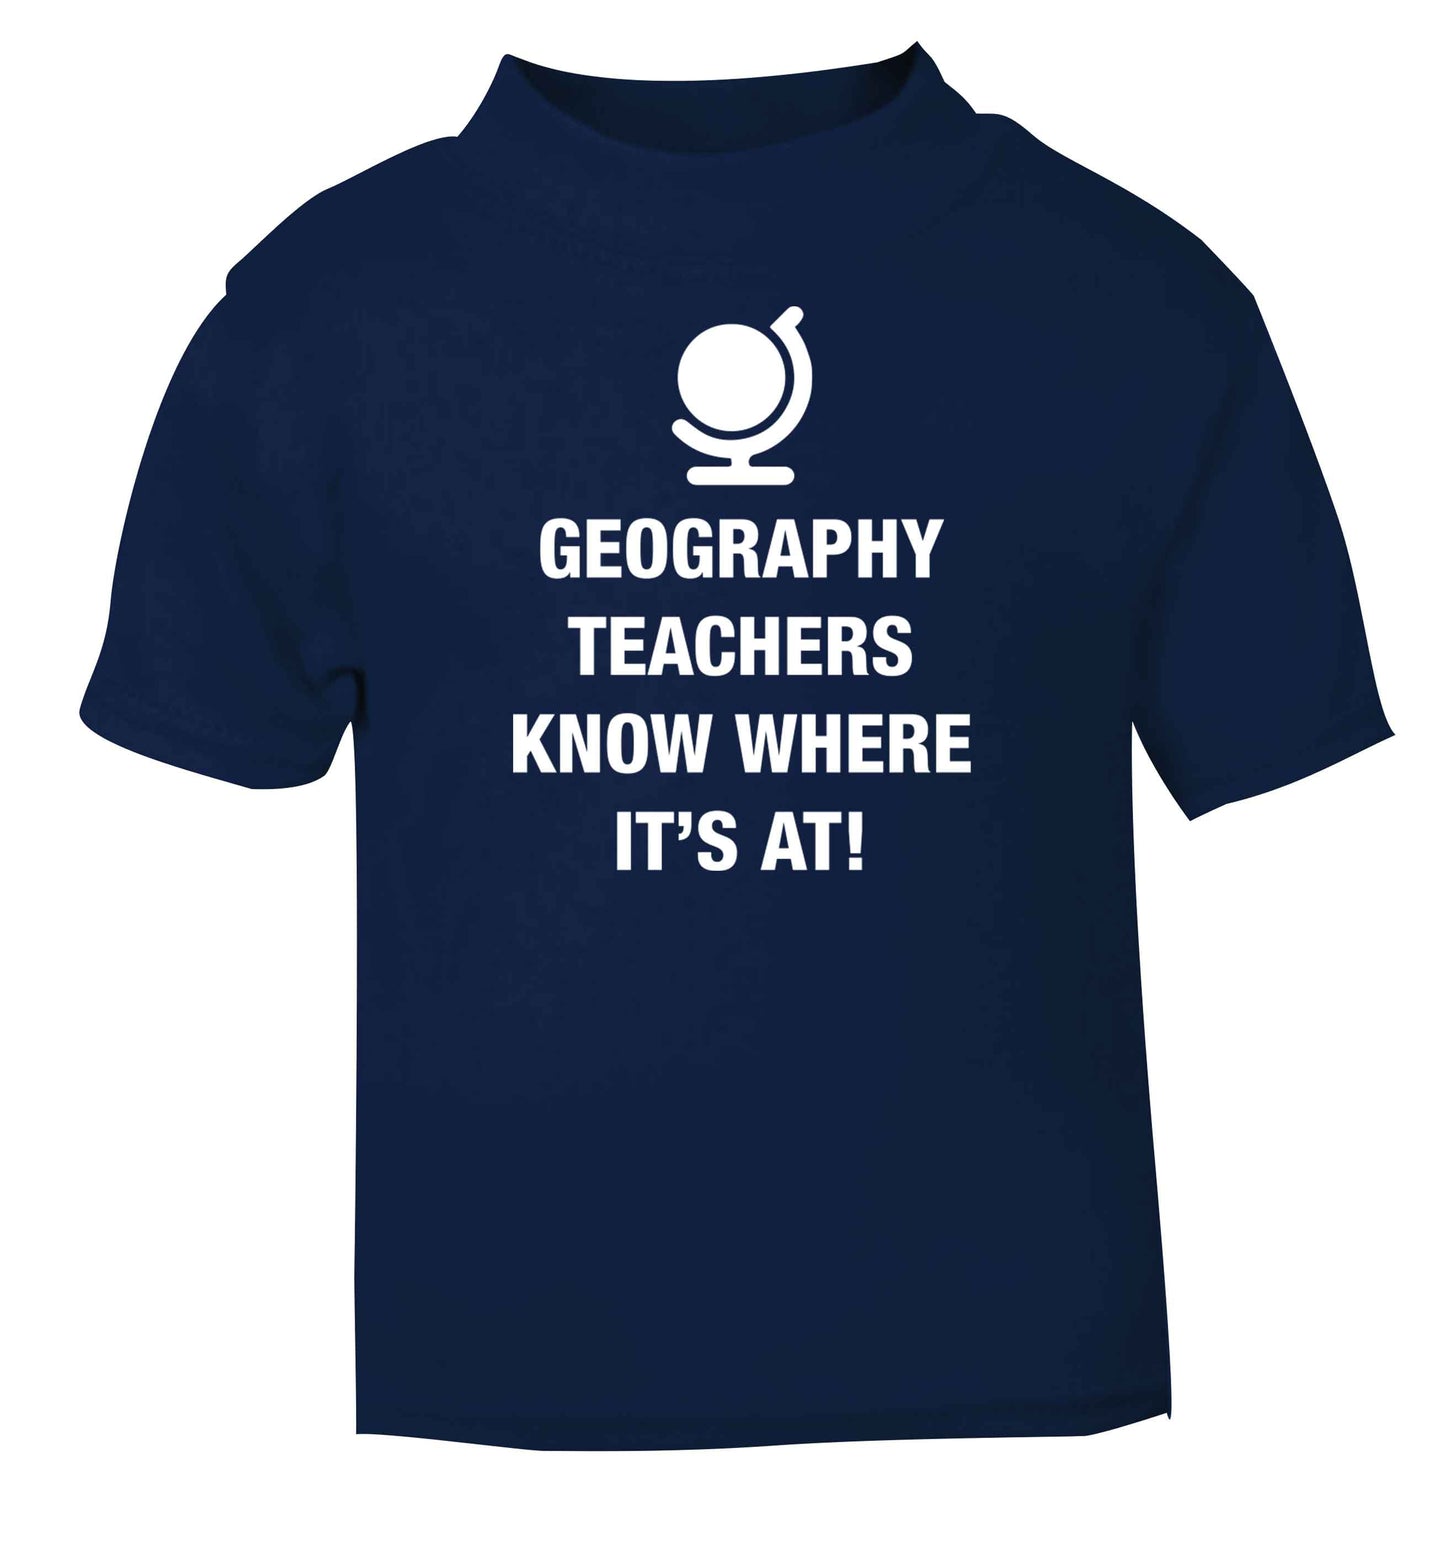 Geography teachers know where it's at navy baby toddler Tshirt 2 Years